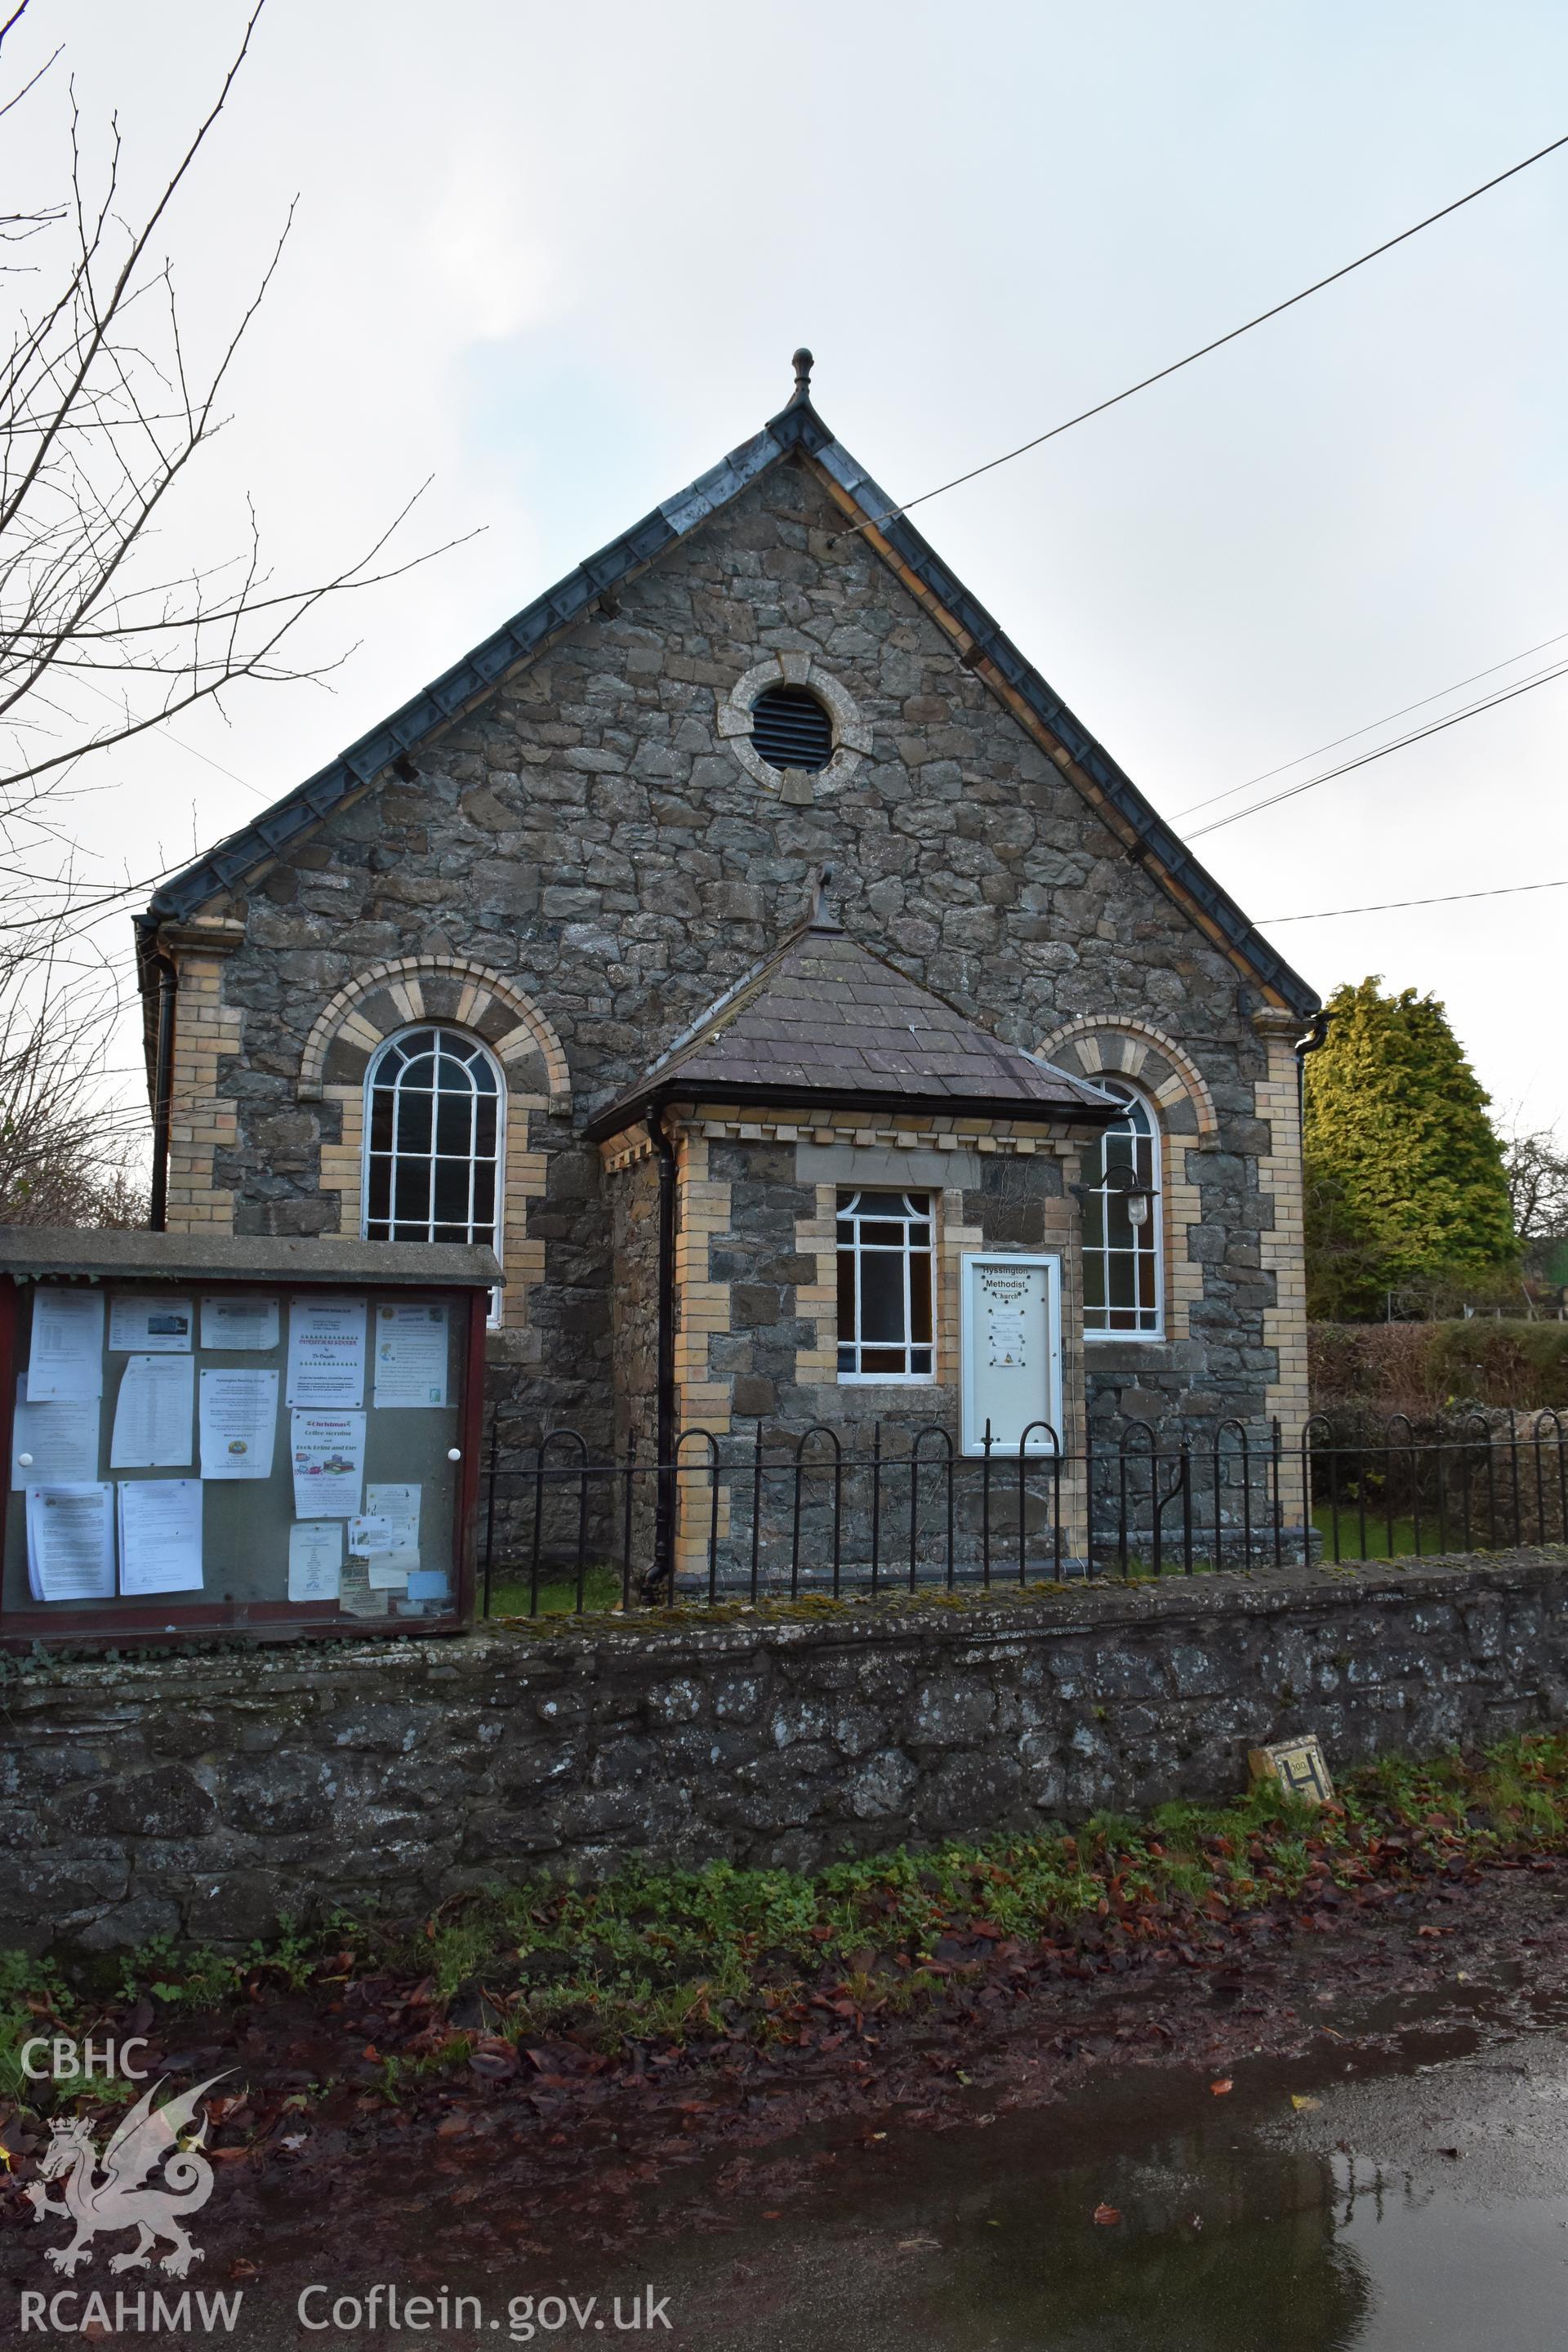 View from the east showing the exterior of the front gable at Hyssington Primitive Methodist Chapel, Hyssington, Churchstoke. Photographic survey conducted by Sue Fielding on 7th December 2018.